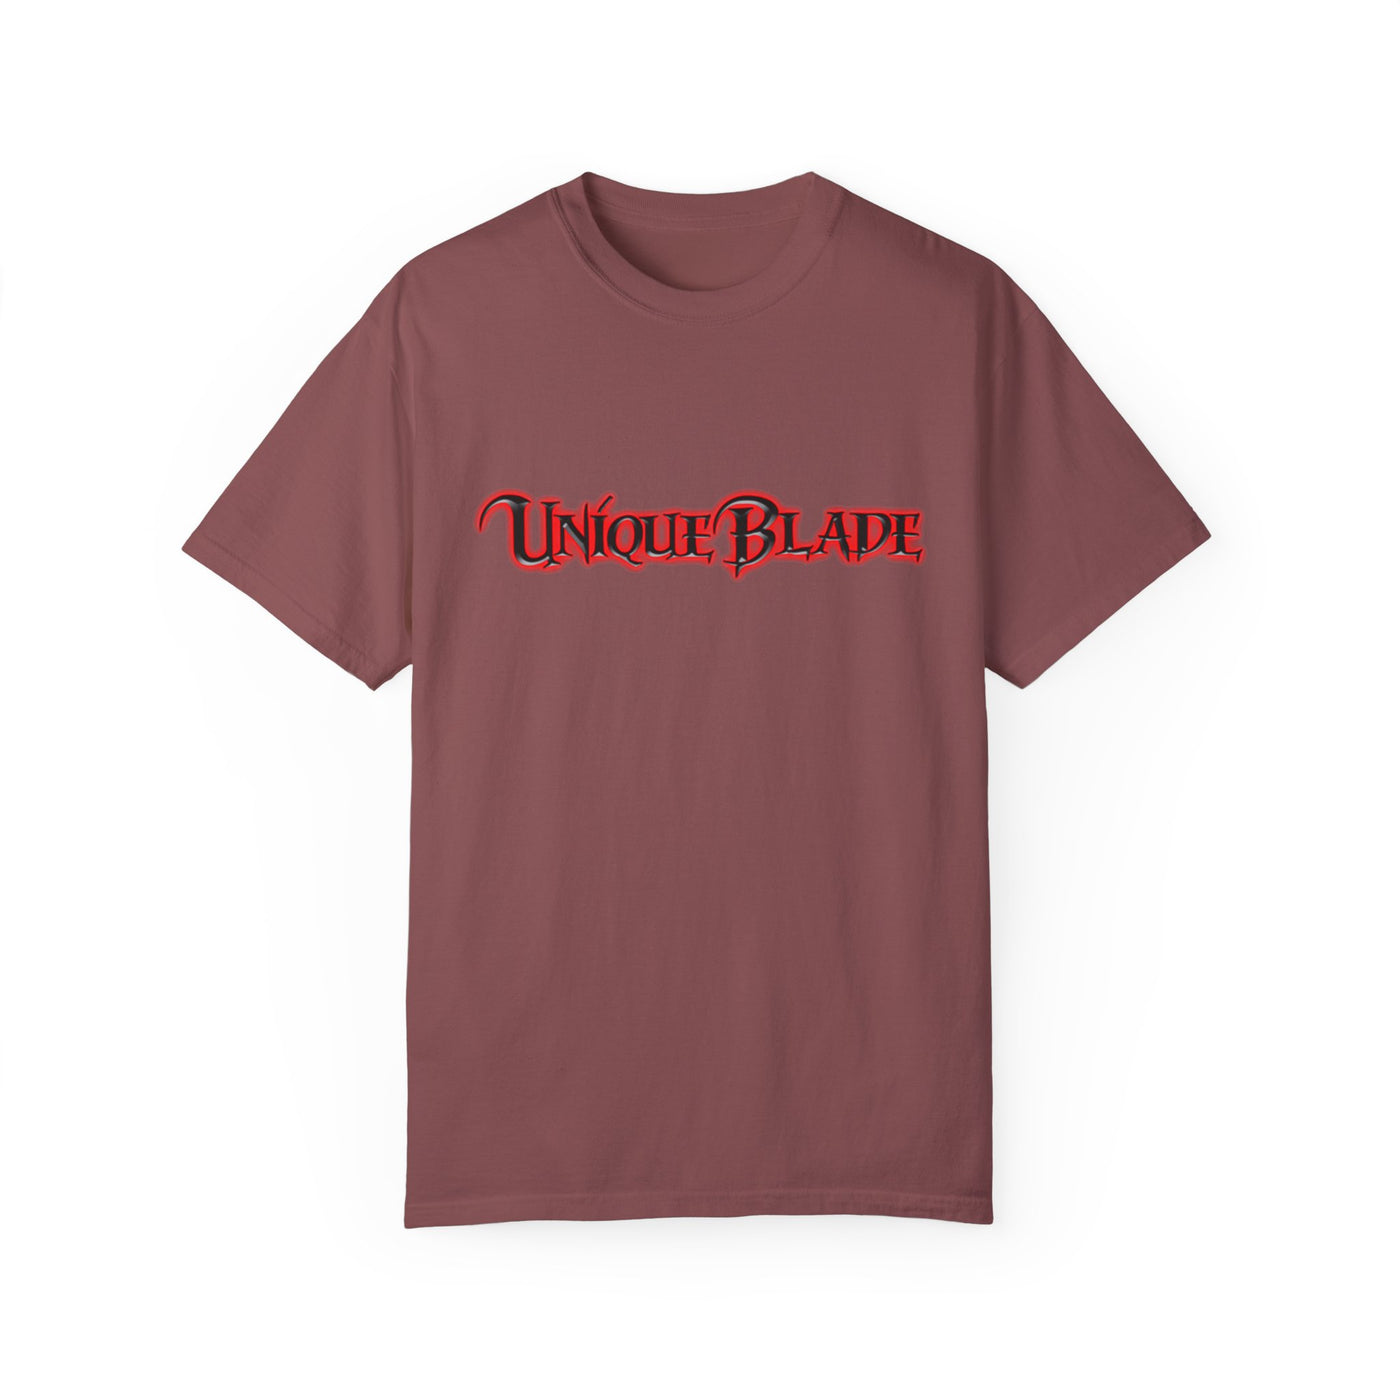  Unisex Garment-Dyed T-shirt - Comfortable and versatile t-shirt suitable for both men and women, with a unique garment-dyed finish for a vintage look and soft feel.